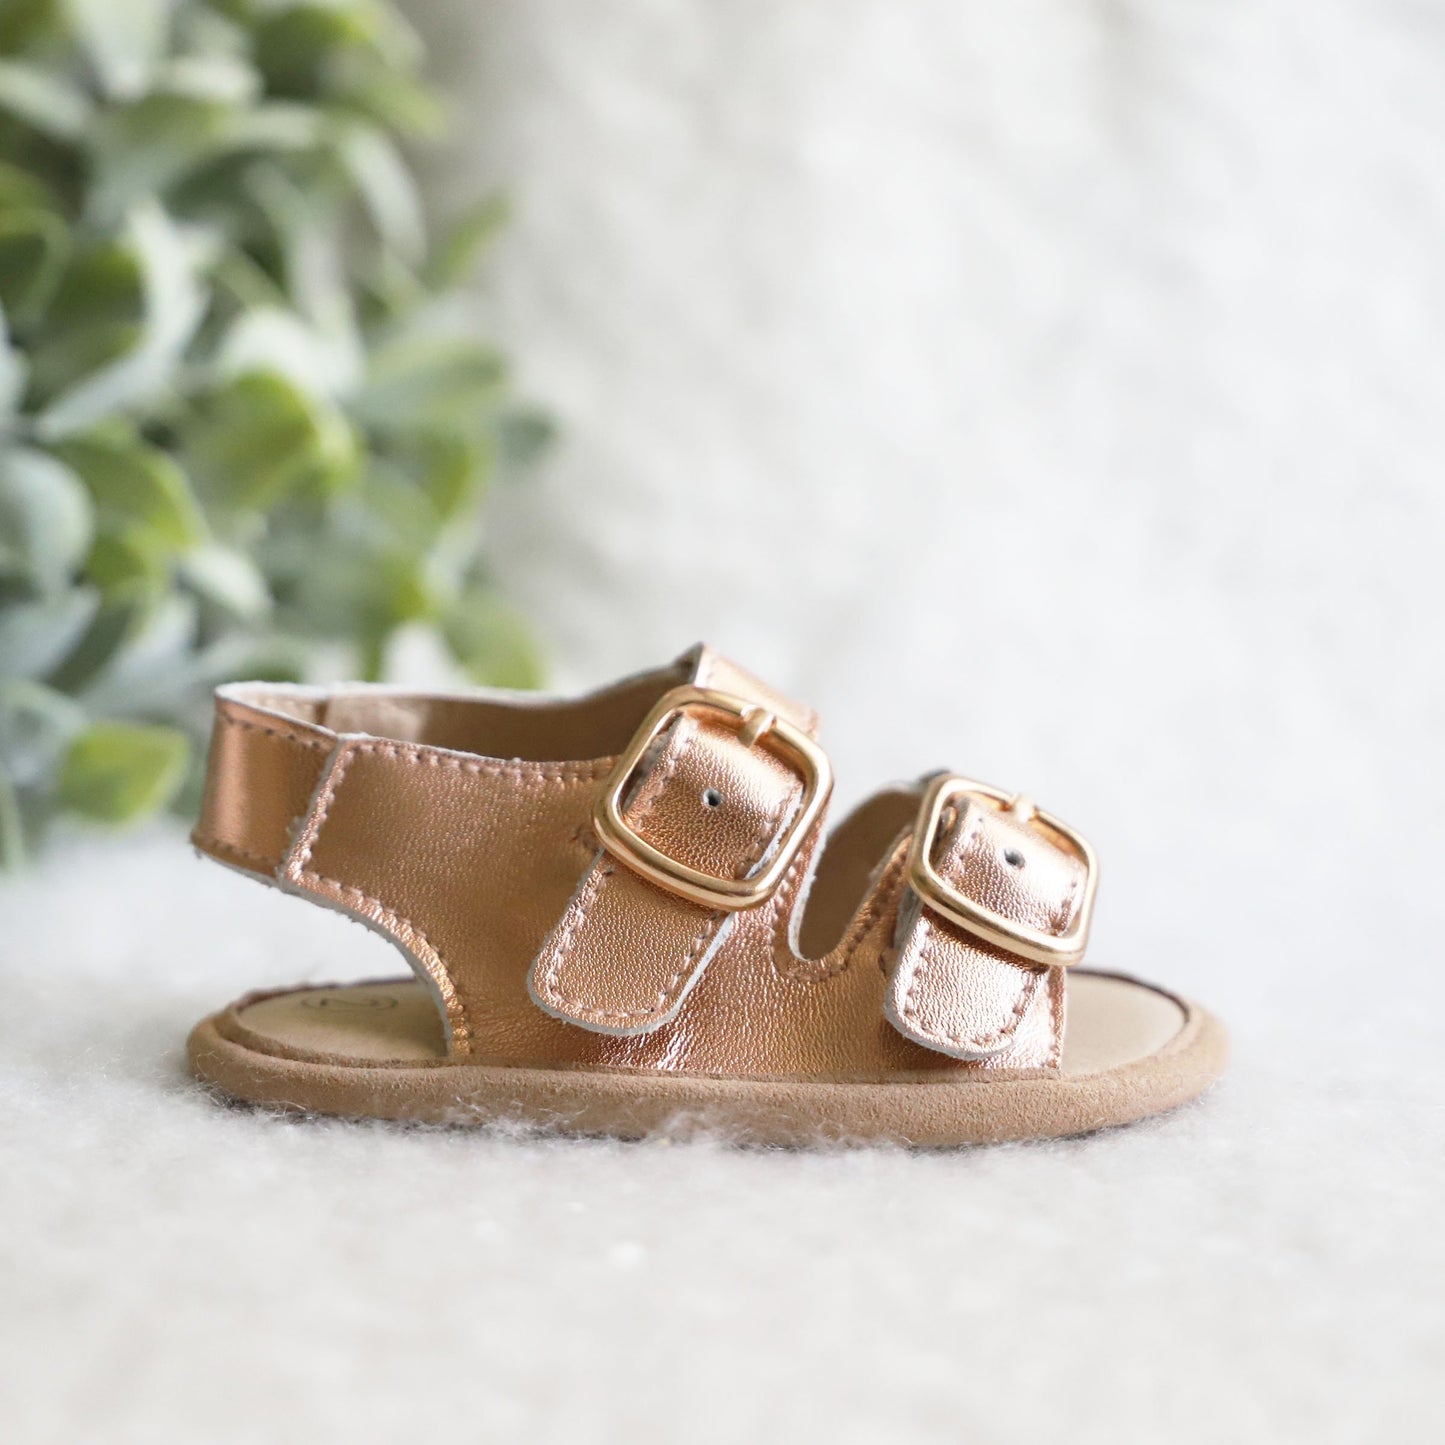 Load image into Gallery viewer, Rose Gold Charley Sandal Sandal Little Love Bug Co. 5 (Minimalist Sole) 
